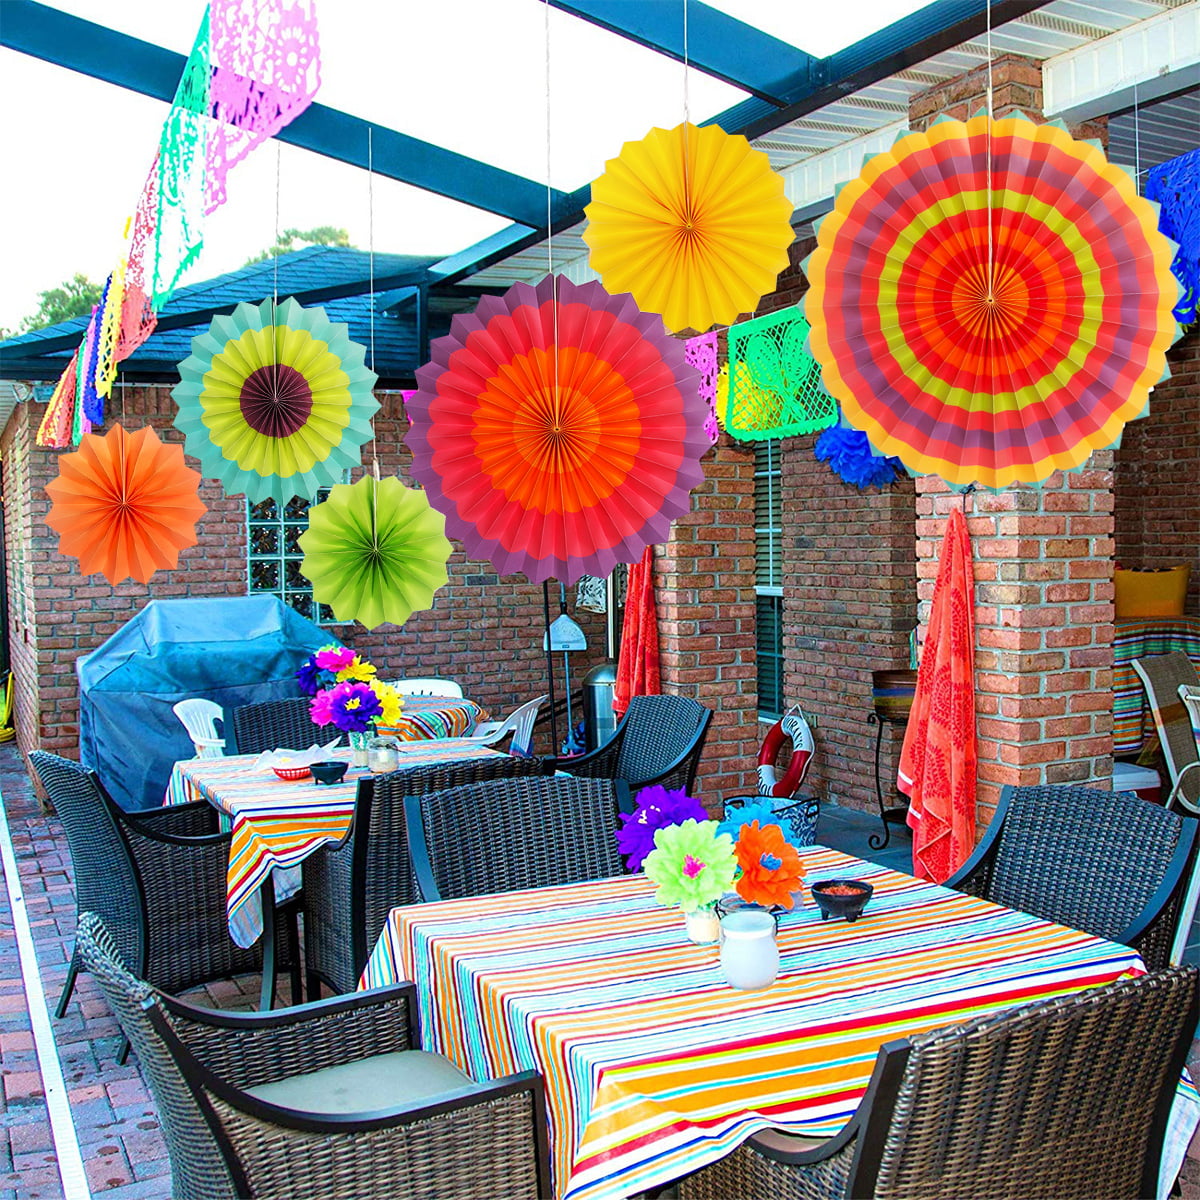 HUAYI 7x5ft Mexican Fiesta Theme Backdrop for Photography Colorful Paper Flowers Festival Birthday Party Decor Cinco De Mayo Carnival Banner Table Photo Background Studio Props W-1959